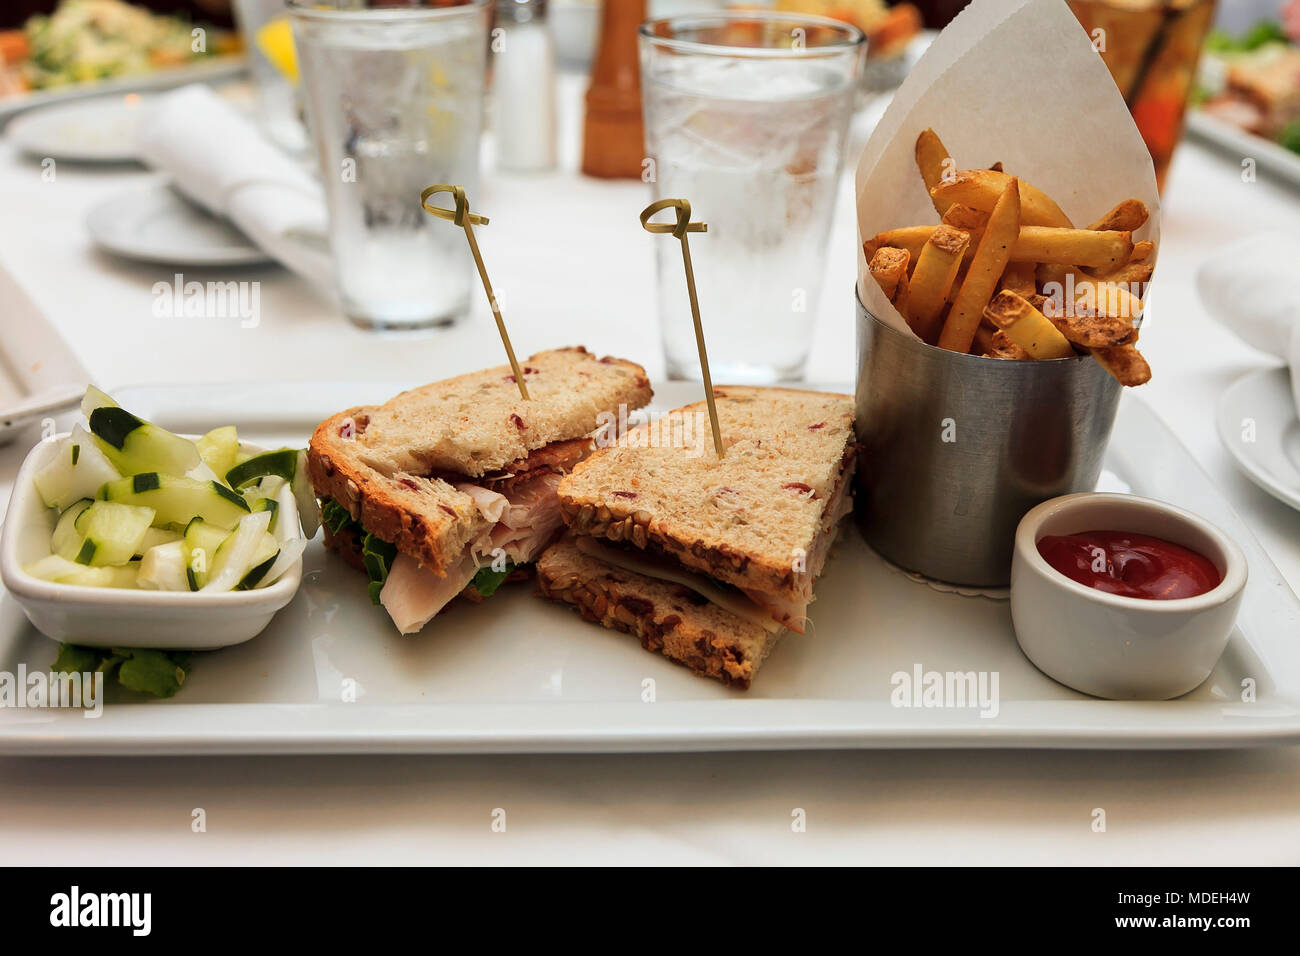 turkey club sandwich and french fries with friends Stock Photo